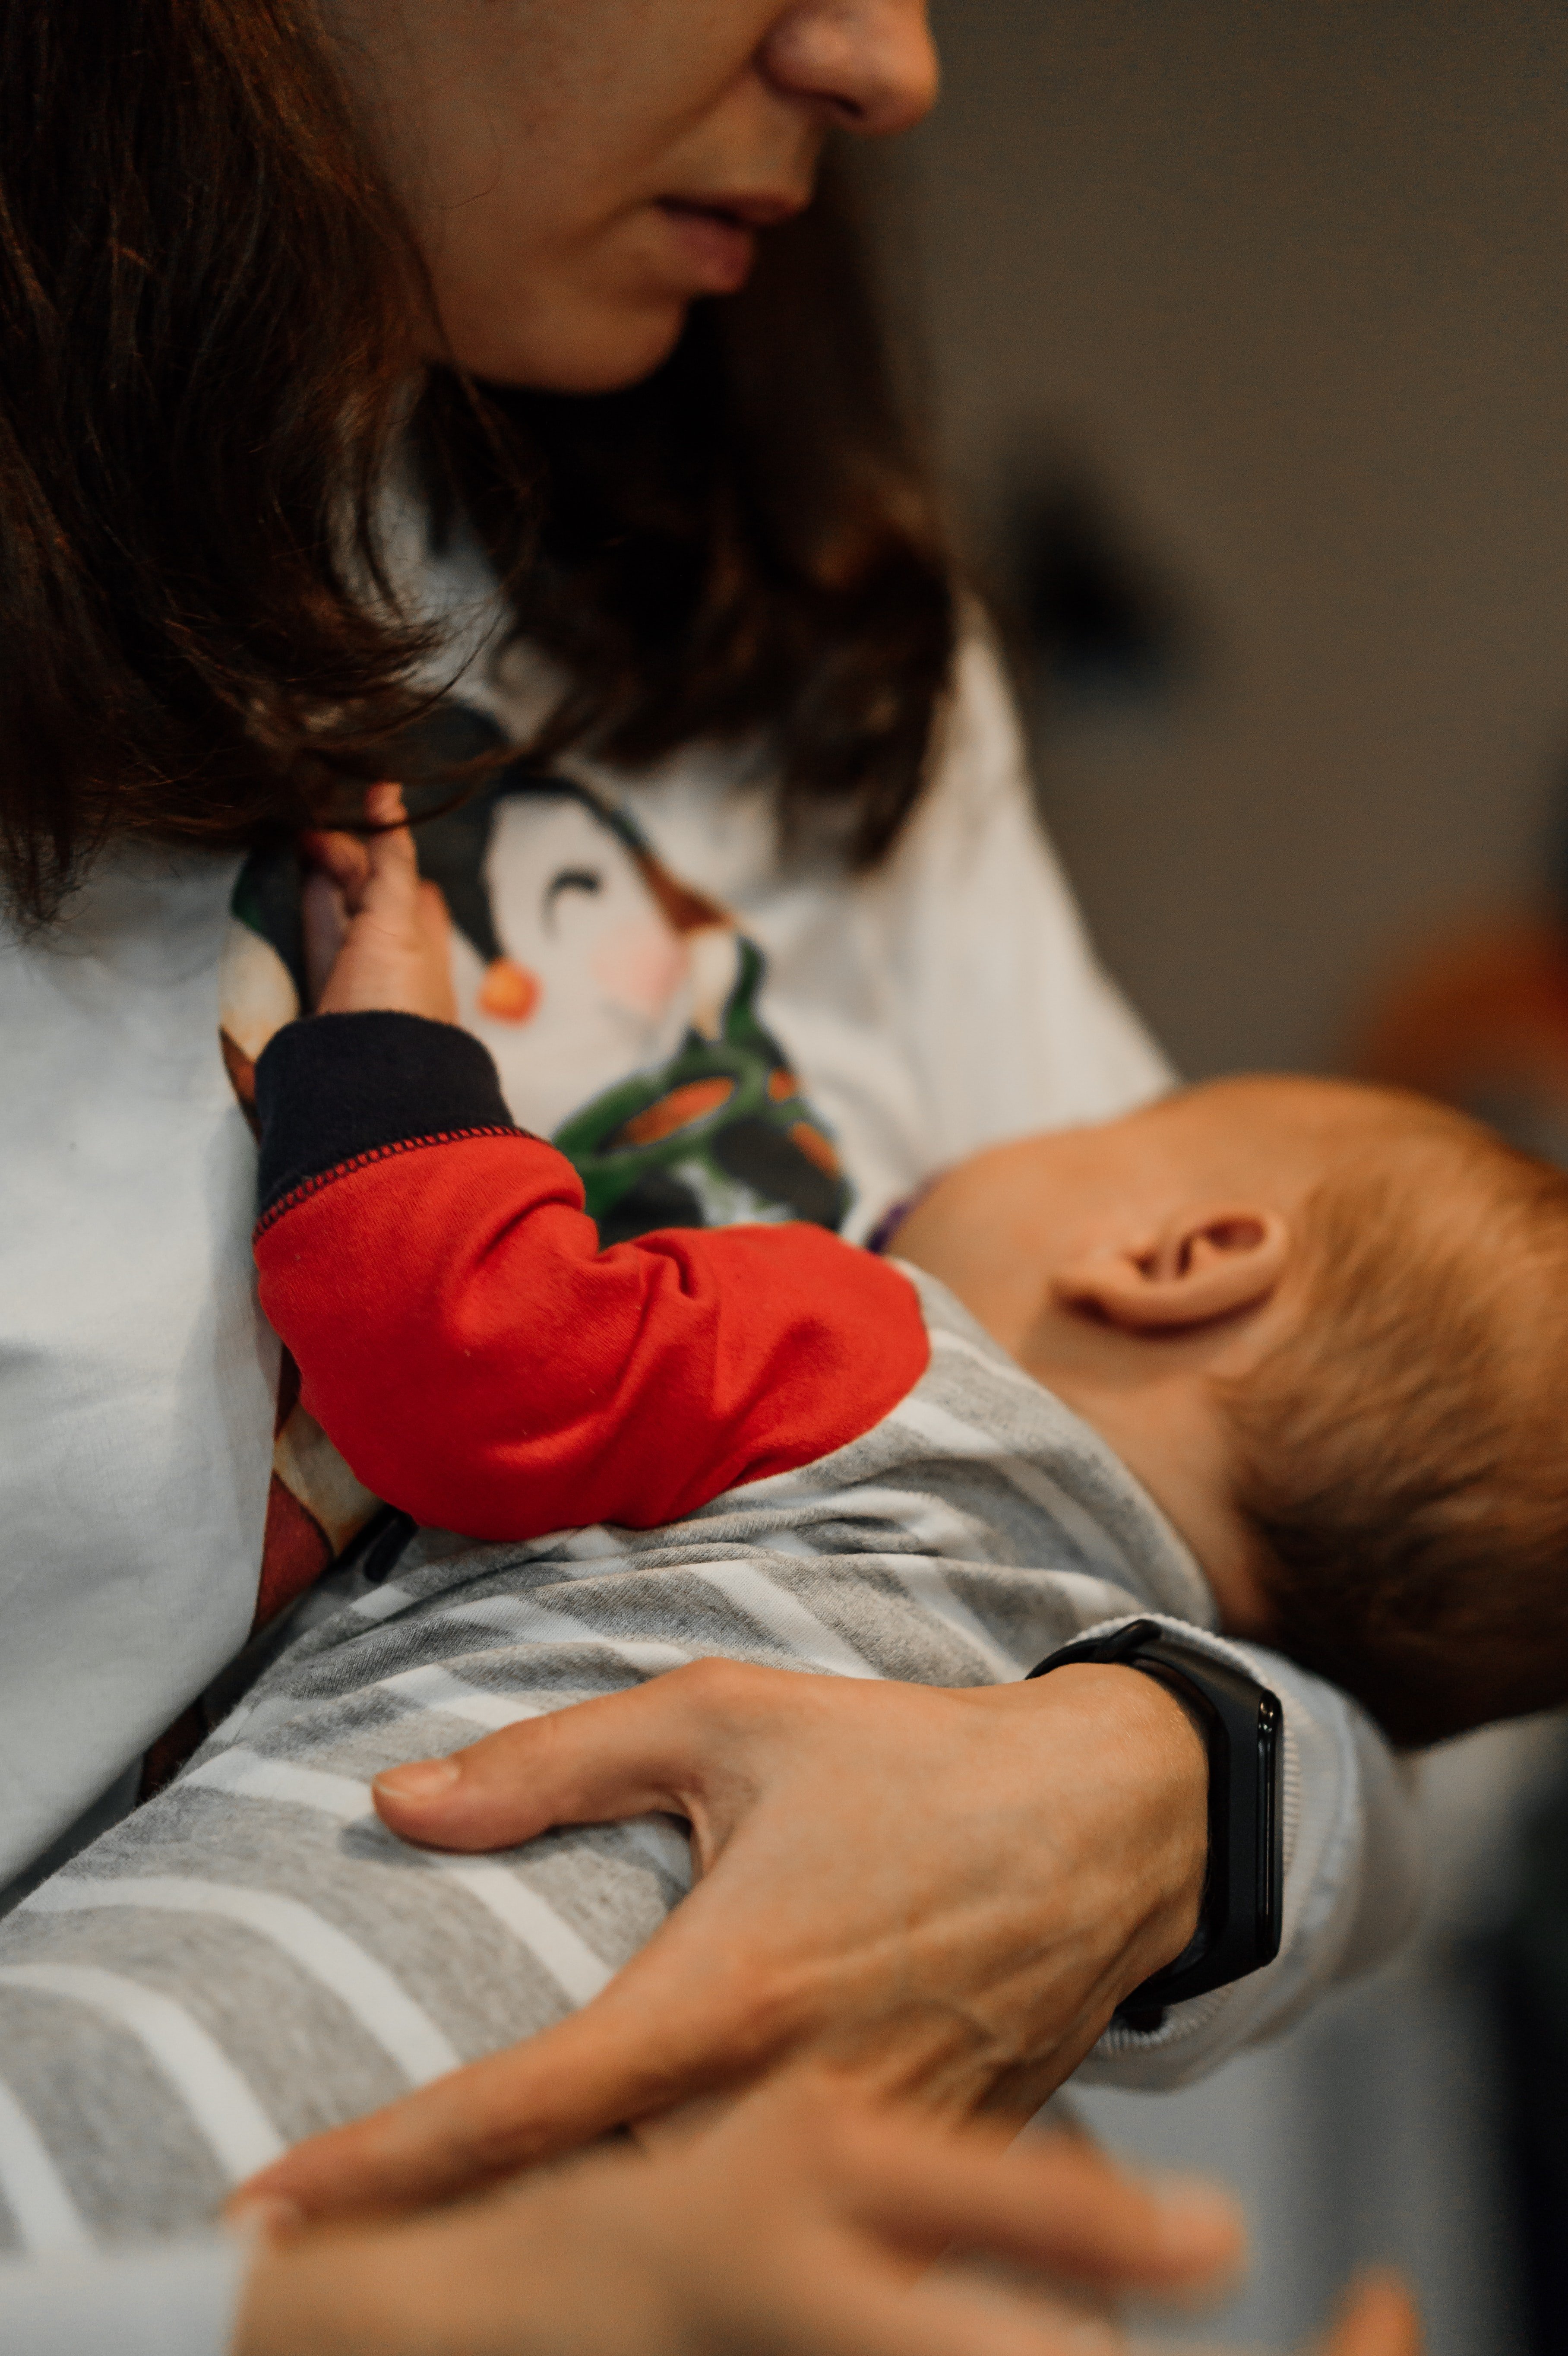 Dylan crossed paths with a woman breastfeeding her baby. | Source: Unsplash